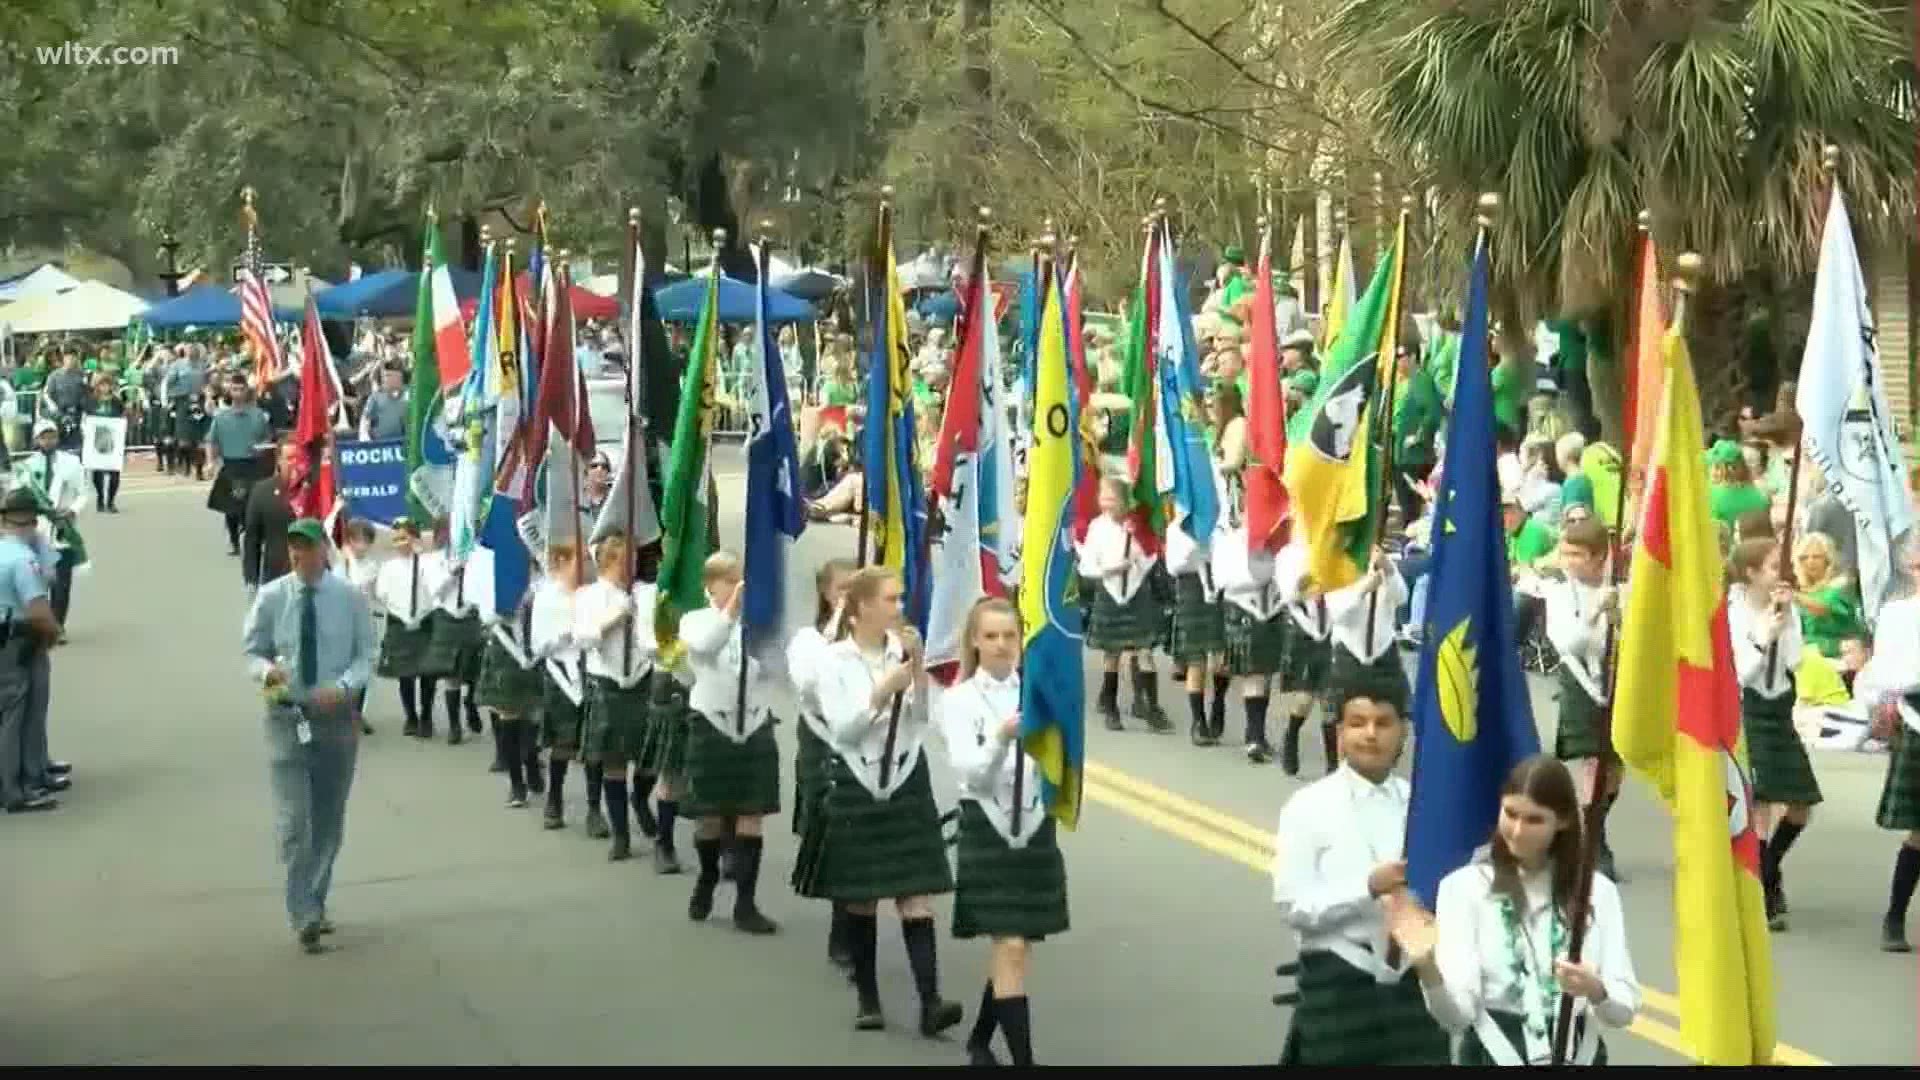 Savannah’s 2021 St. Patrick’s Day festival and parade won’t go on as planned as COVID-19 cases continue to rise.